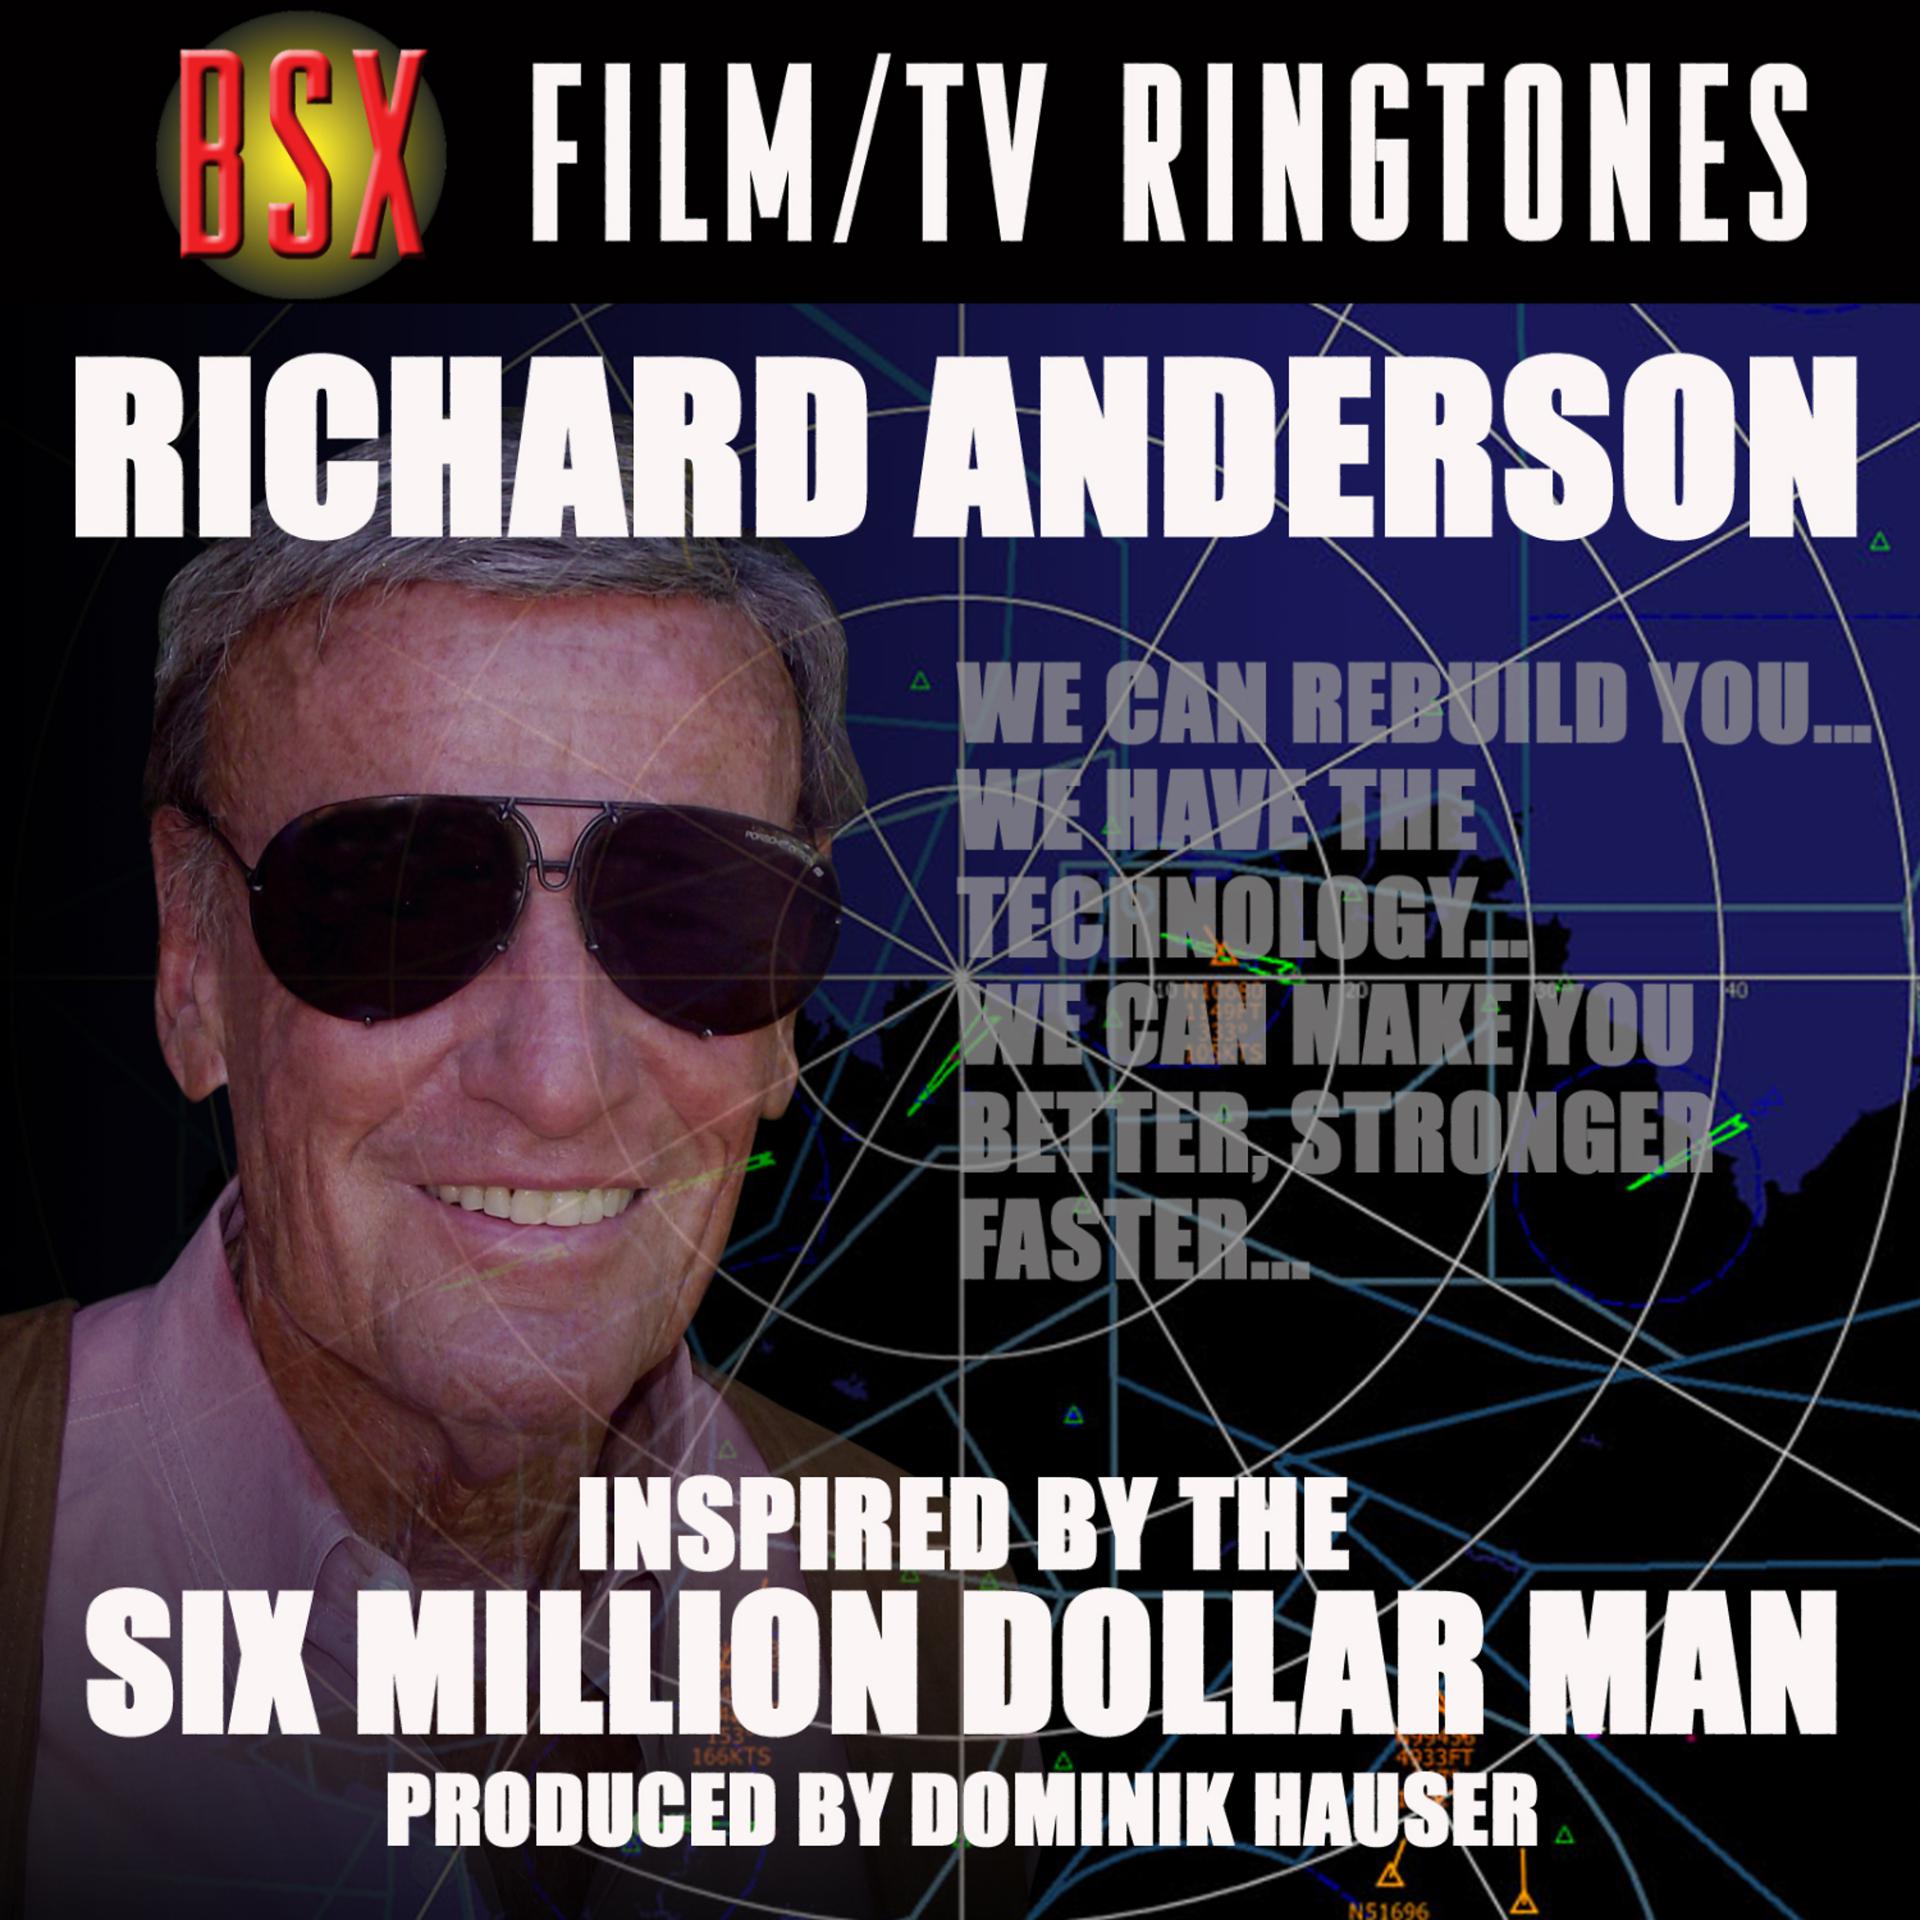 Постер альбома The Six Million Dollar Man: "We Can Rebuild You Into the World's First Cybernetic Woman"